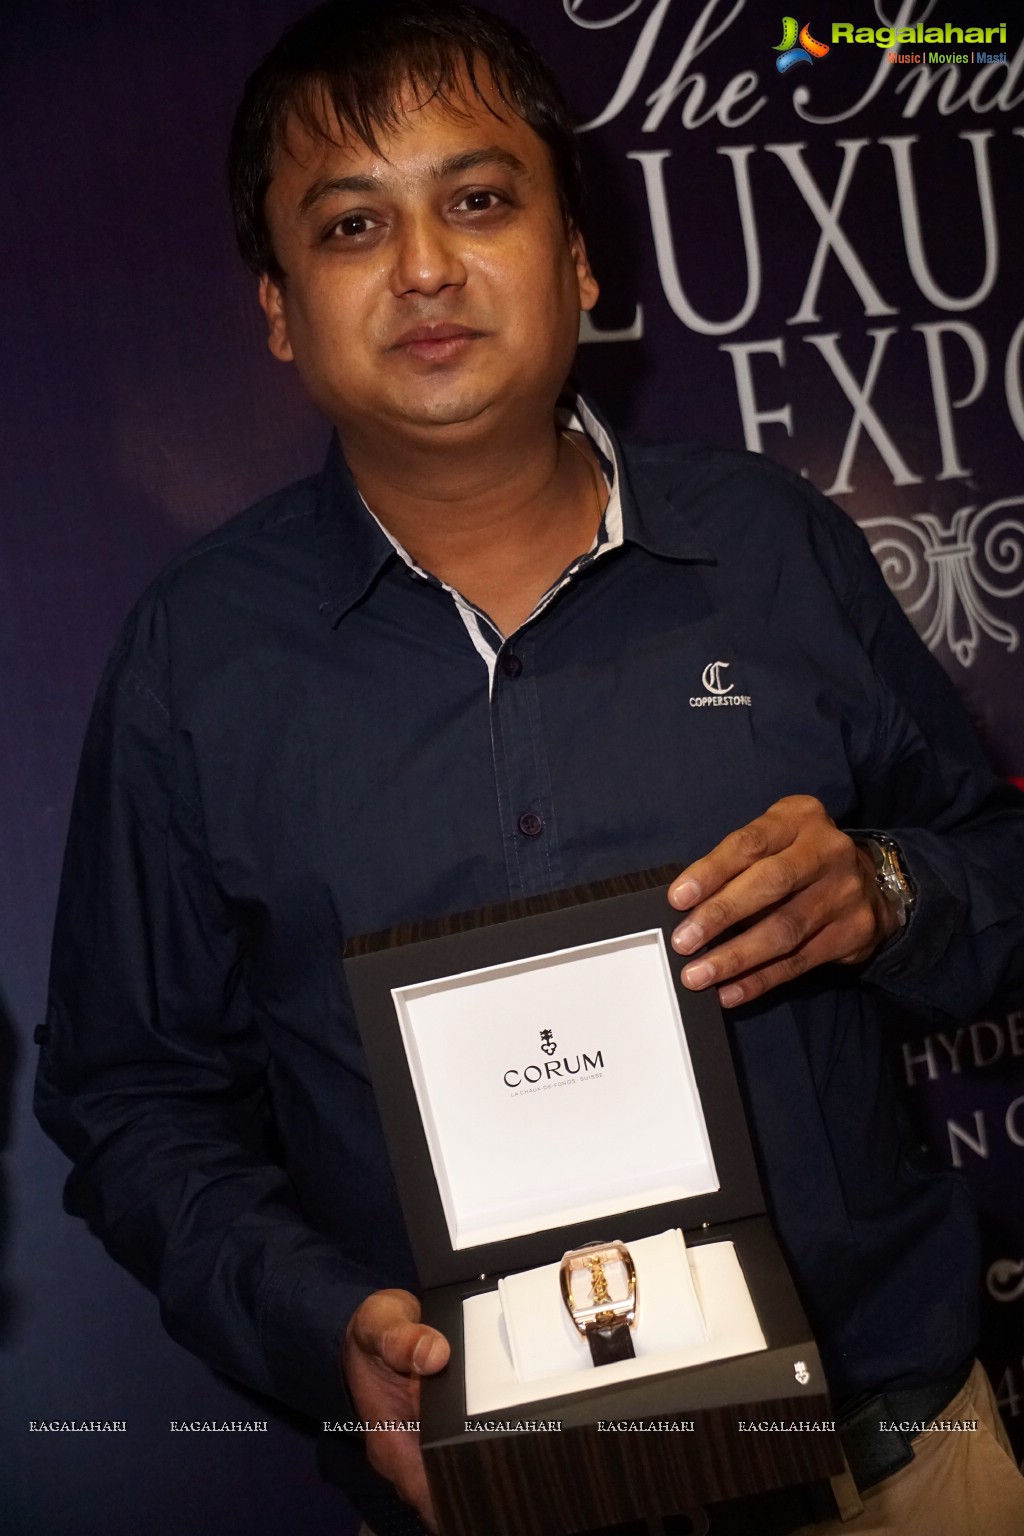 Grand Curtain Raiser of The Indian Luxury Expo 2015